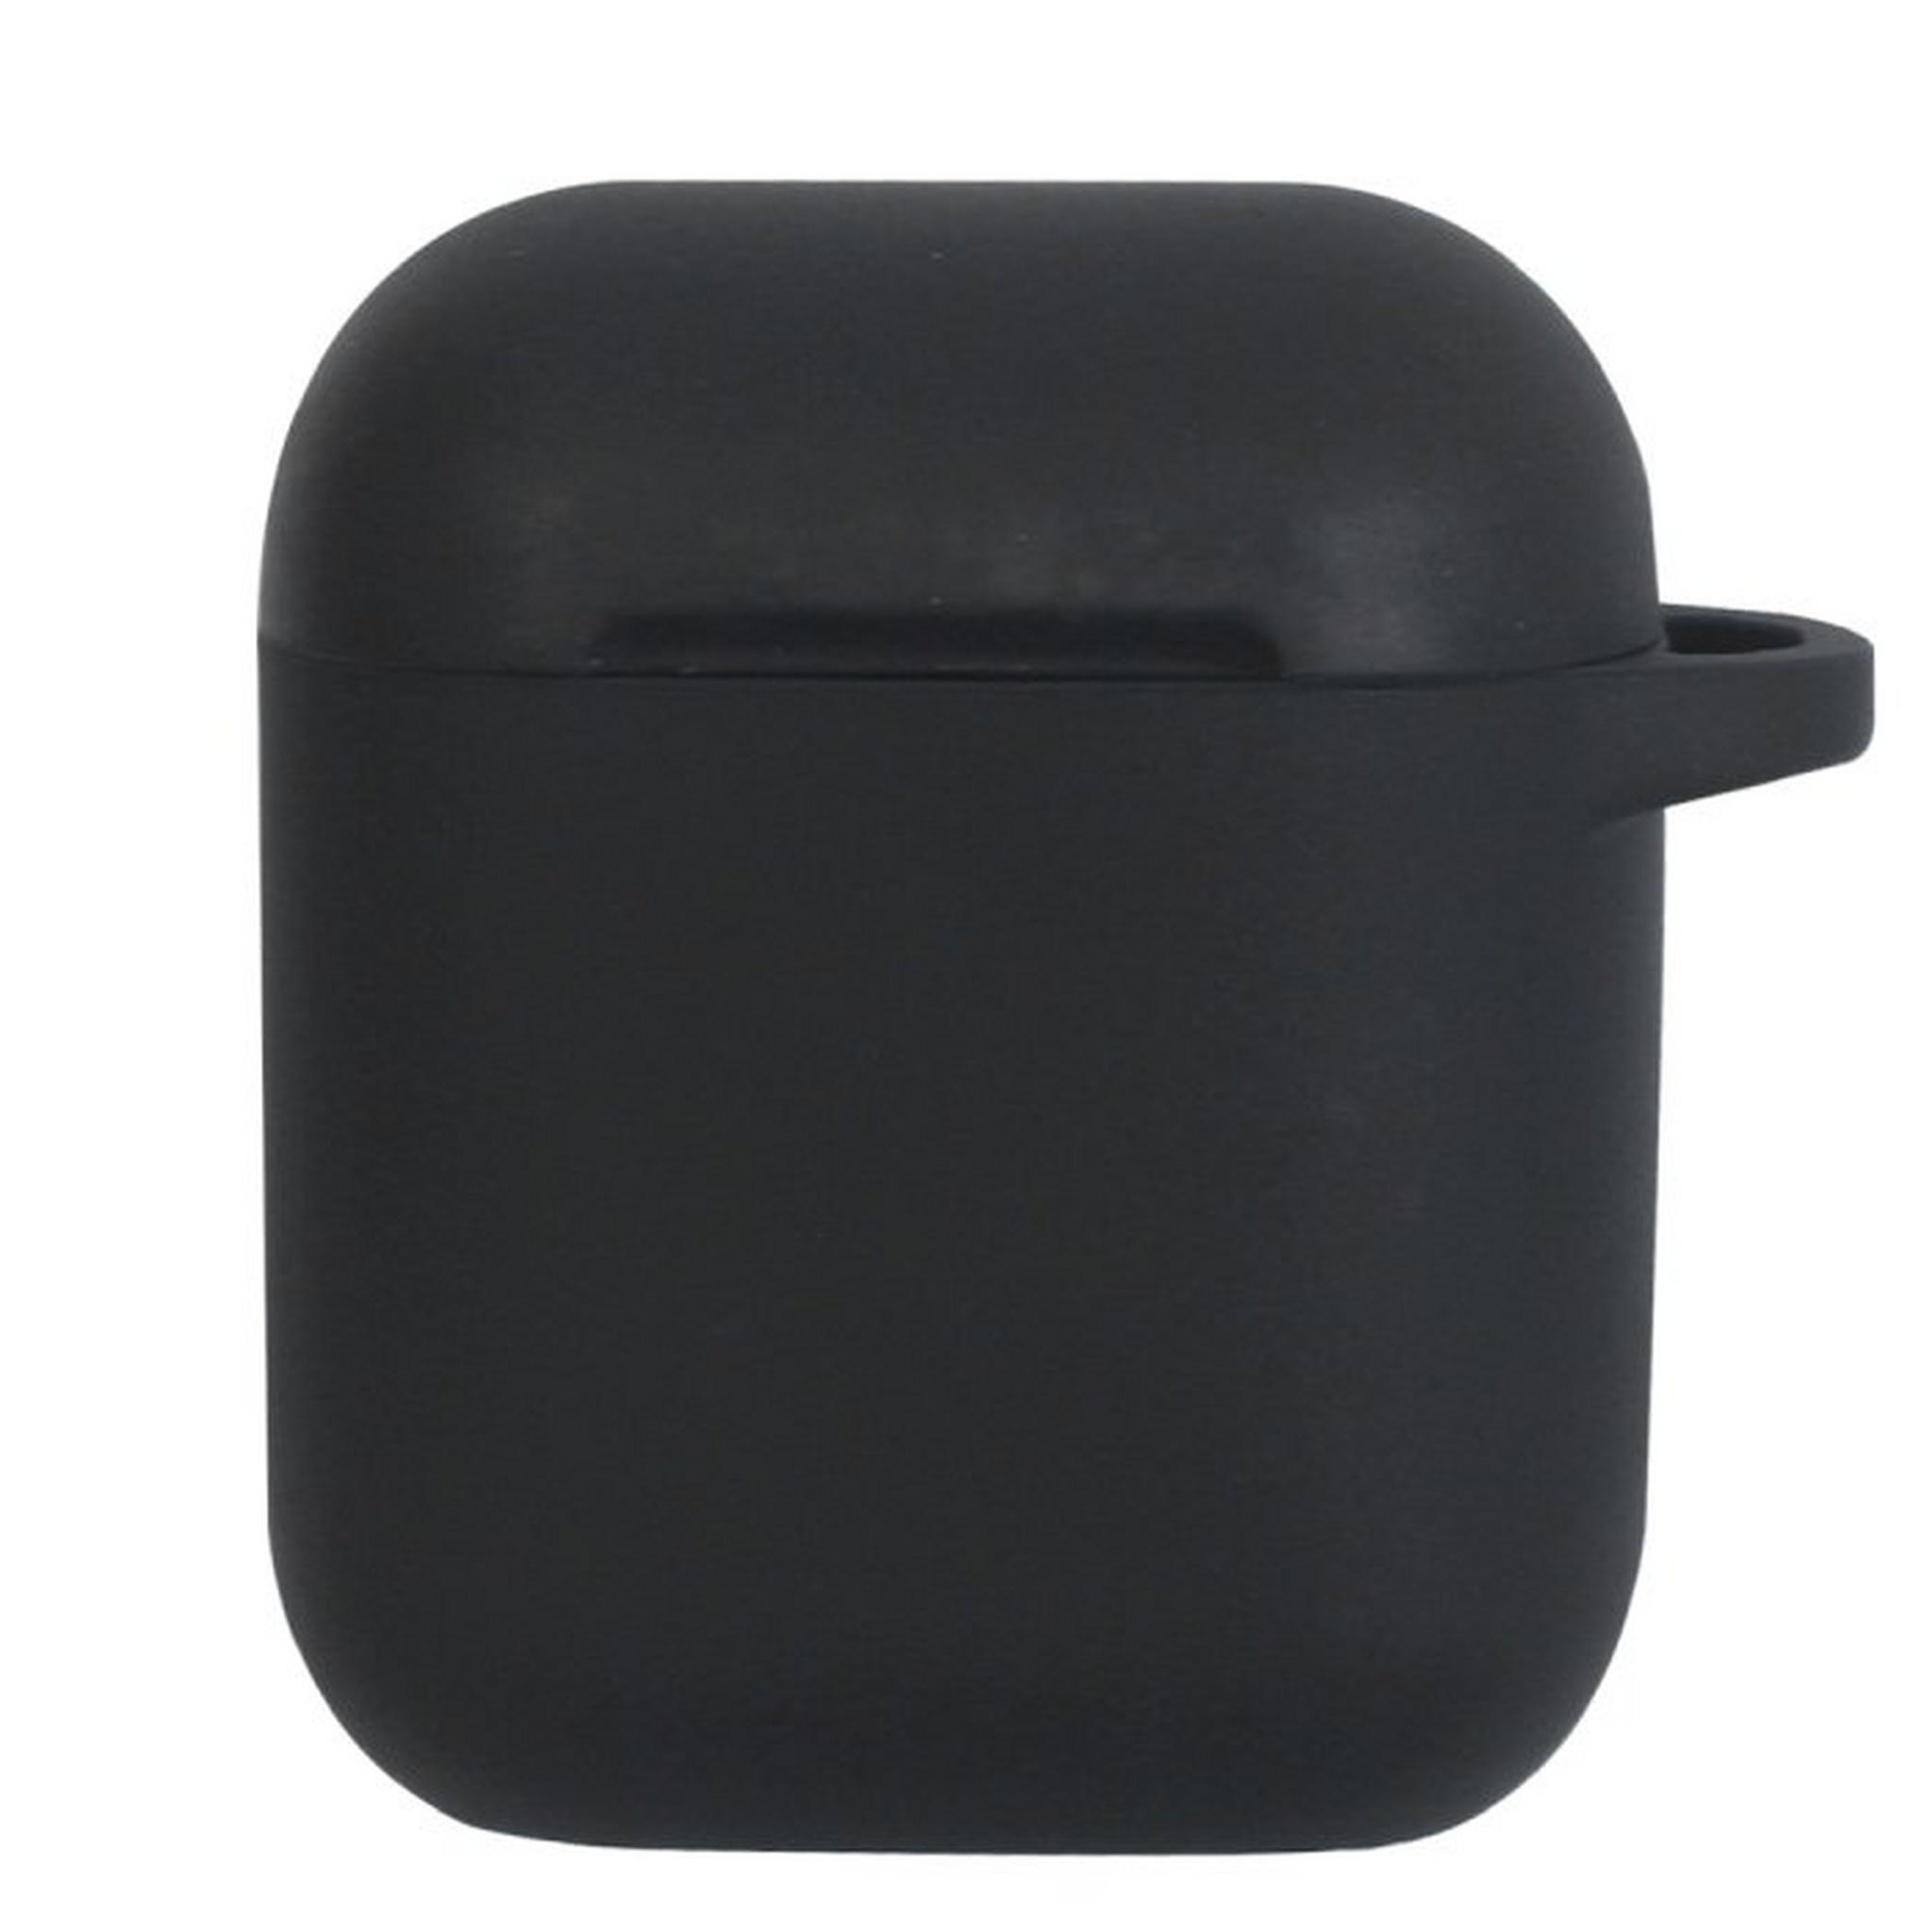 EQ Silicone Apple Airpods 1 and 2 Case - Black